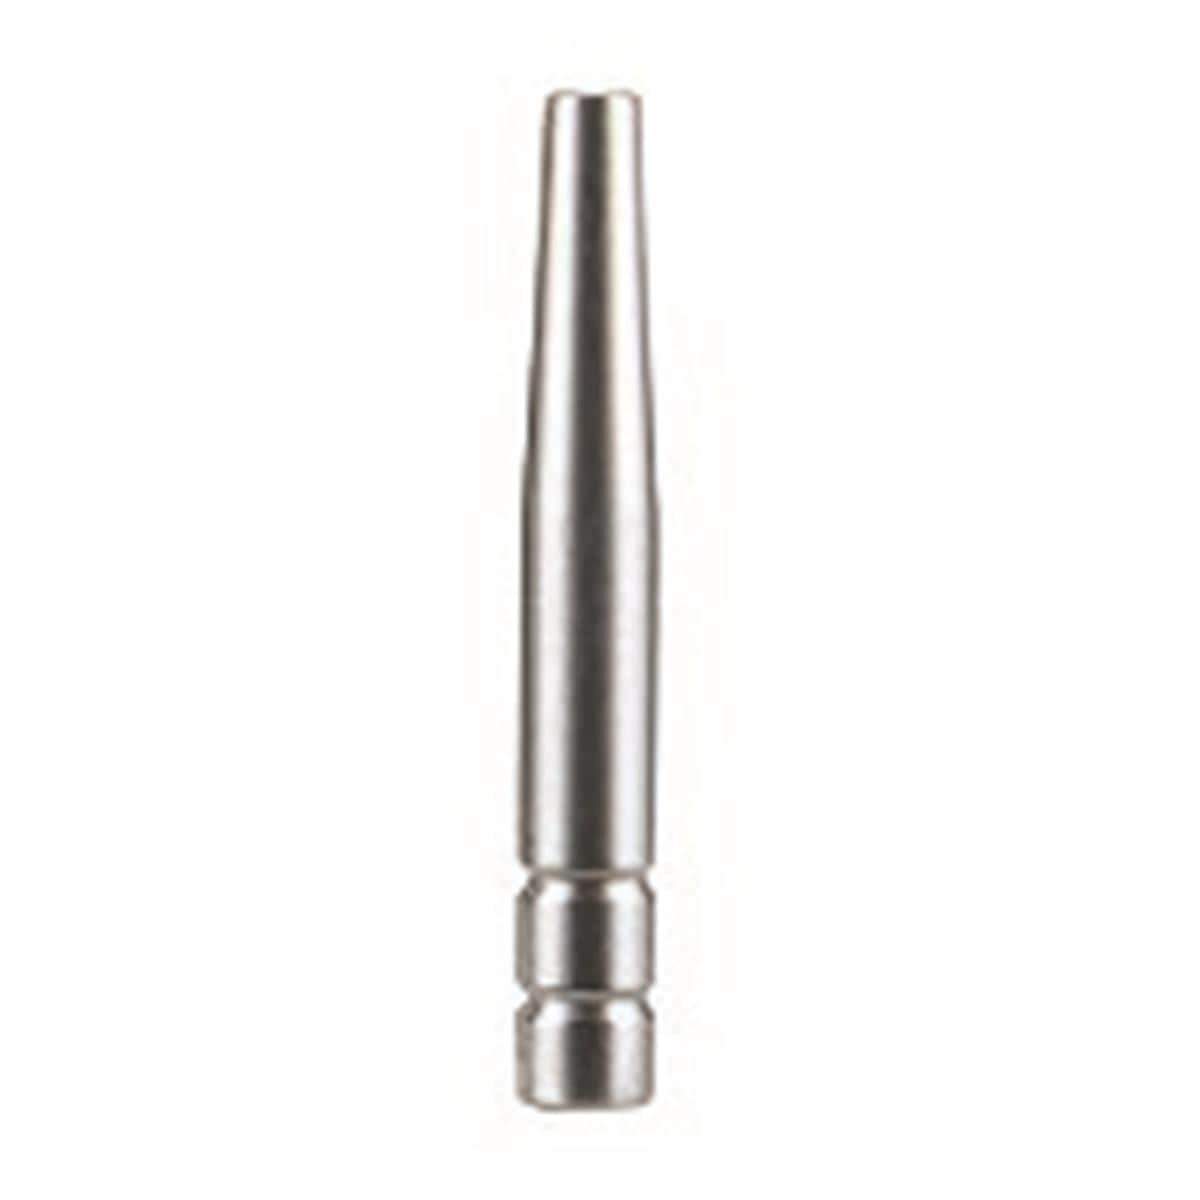 Tenons Cylindro-Coniques Inox L 9.5mm Jaune - Bote de 20 - CONNECT'IC